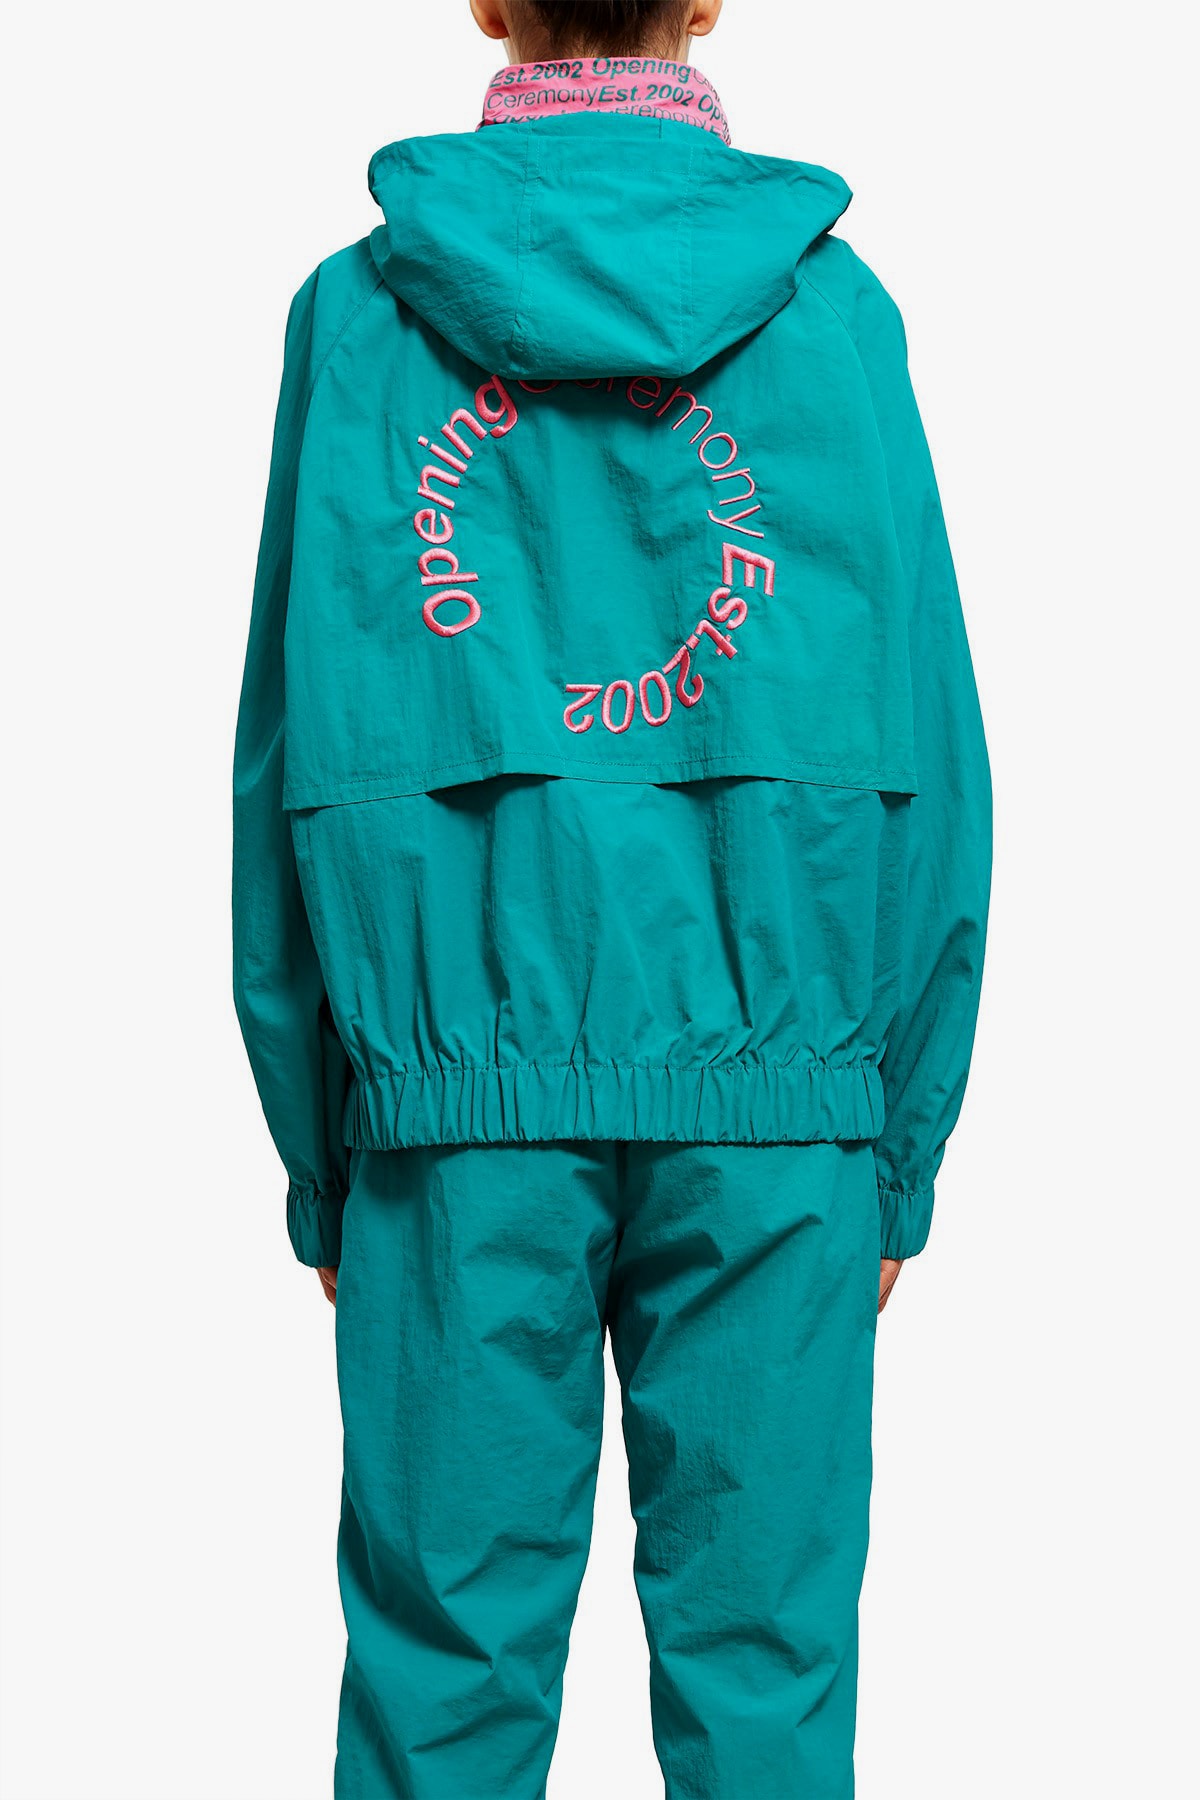 Opening Ceremony Wind Jacket Teal Green